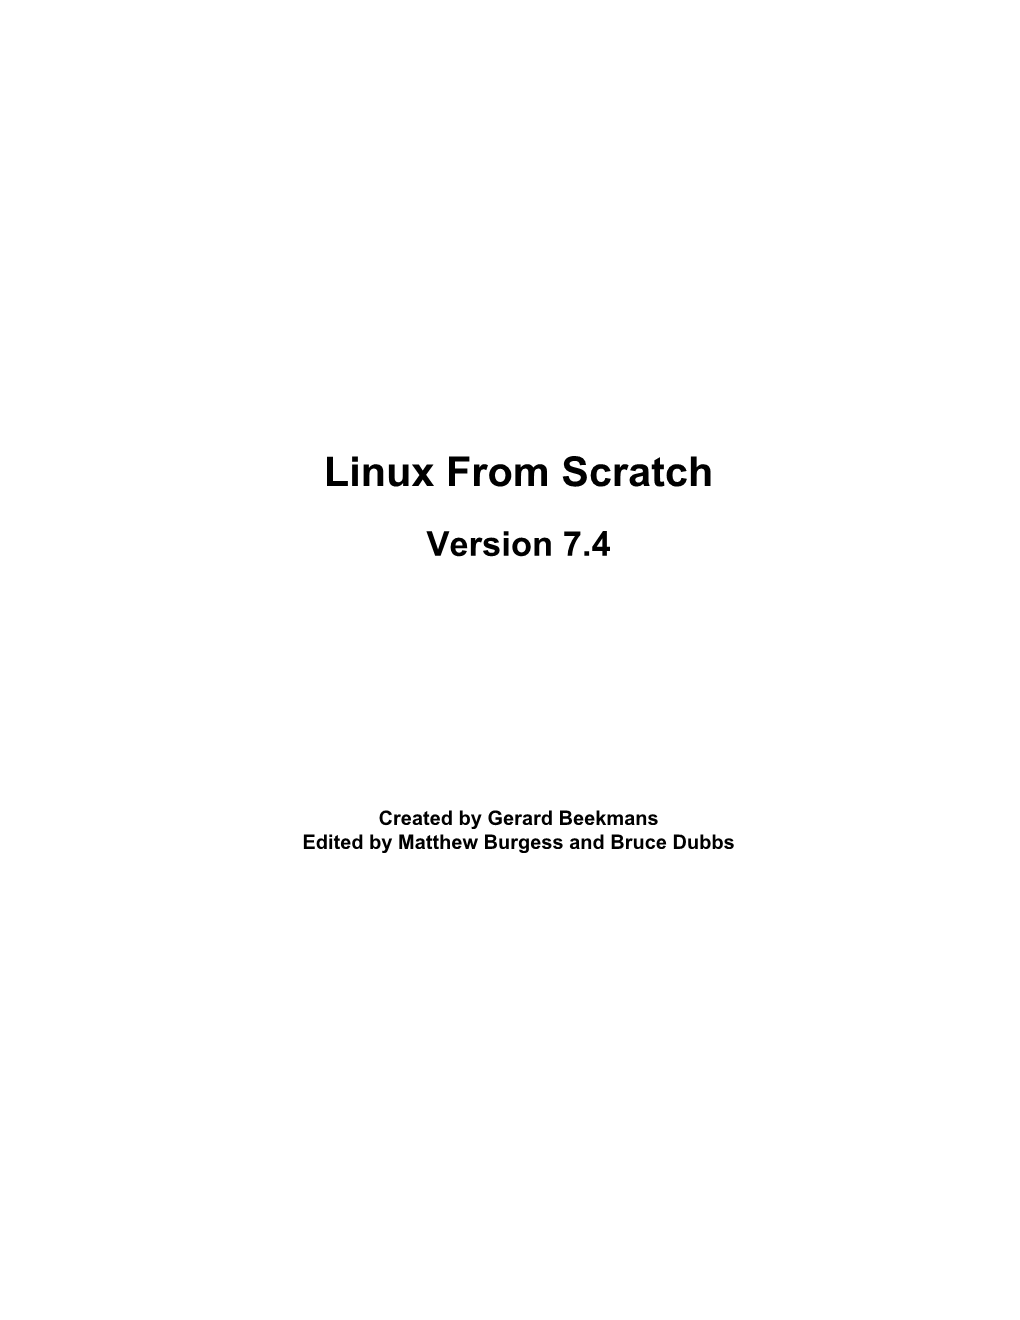 Linux from Scratch Version 7.4